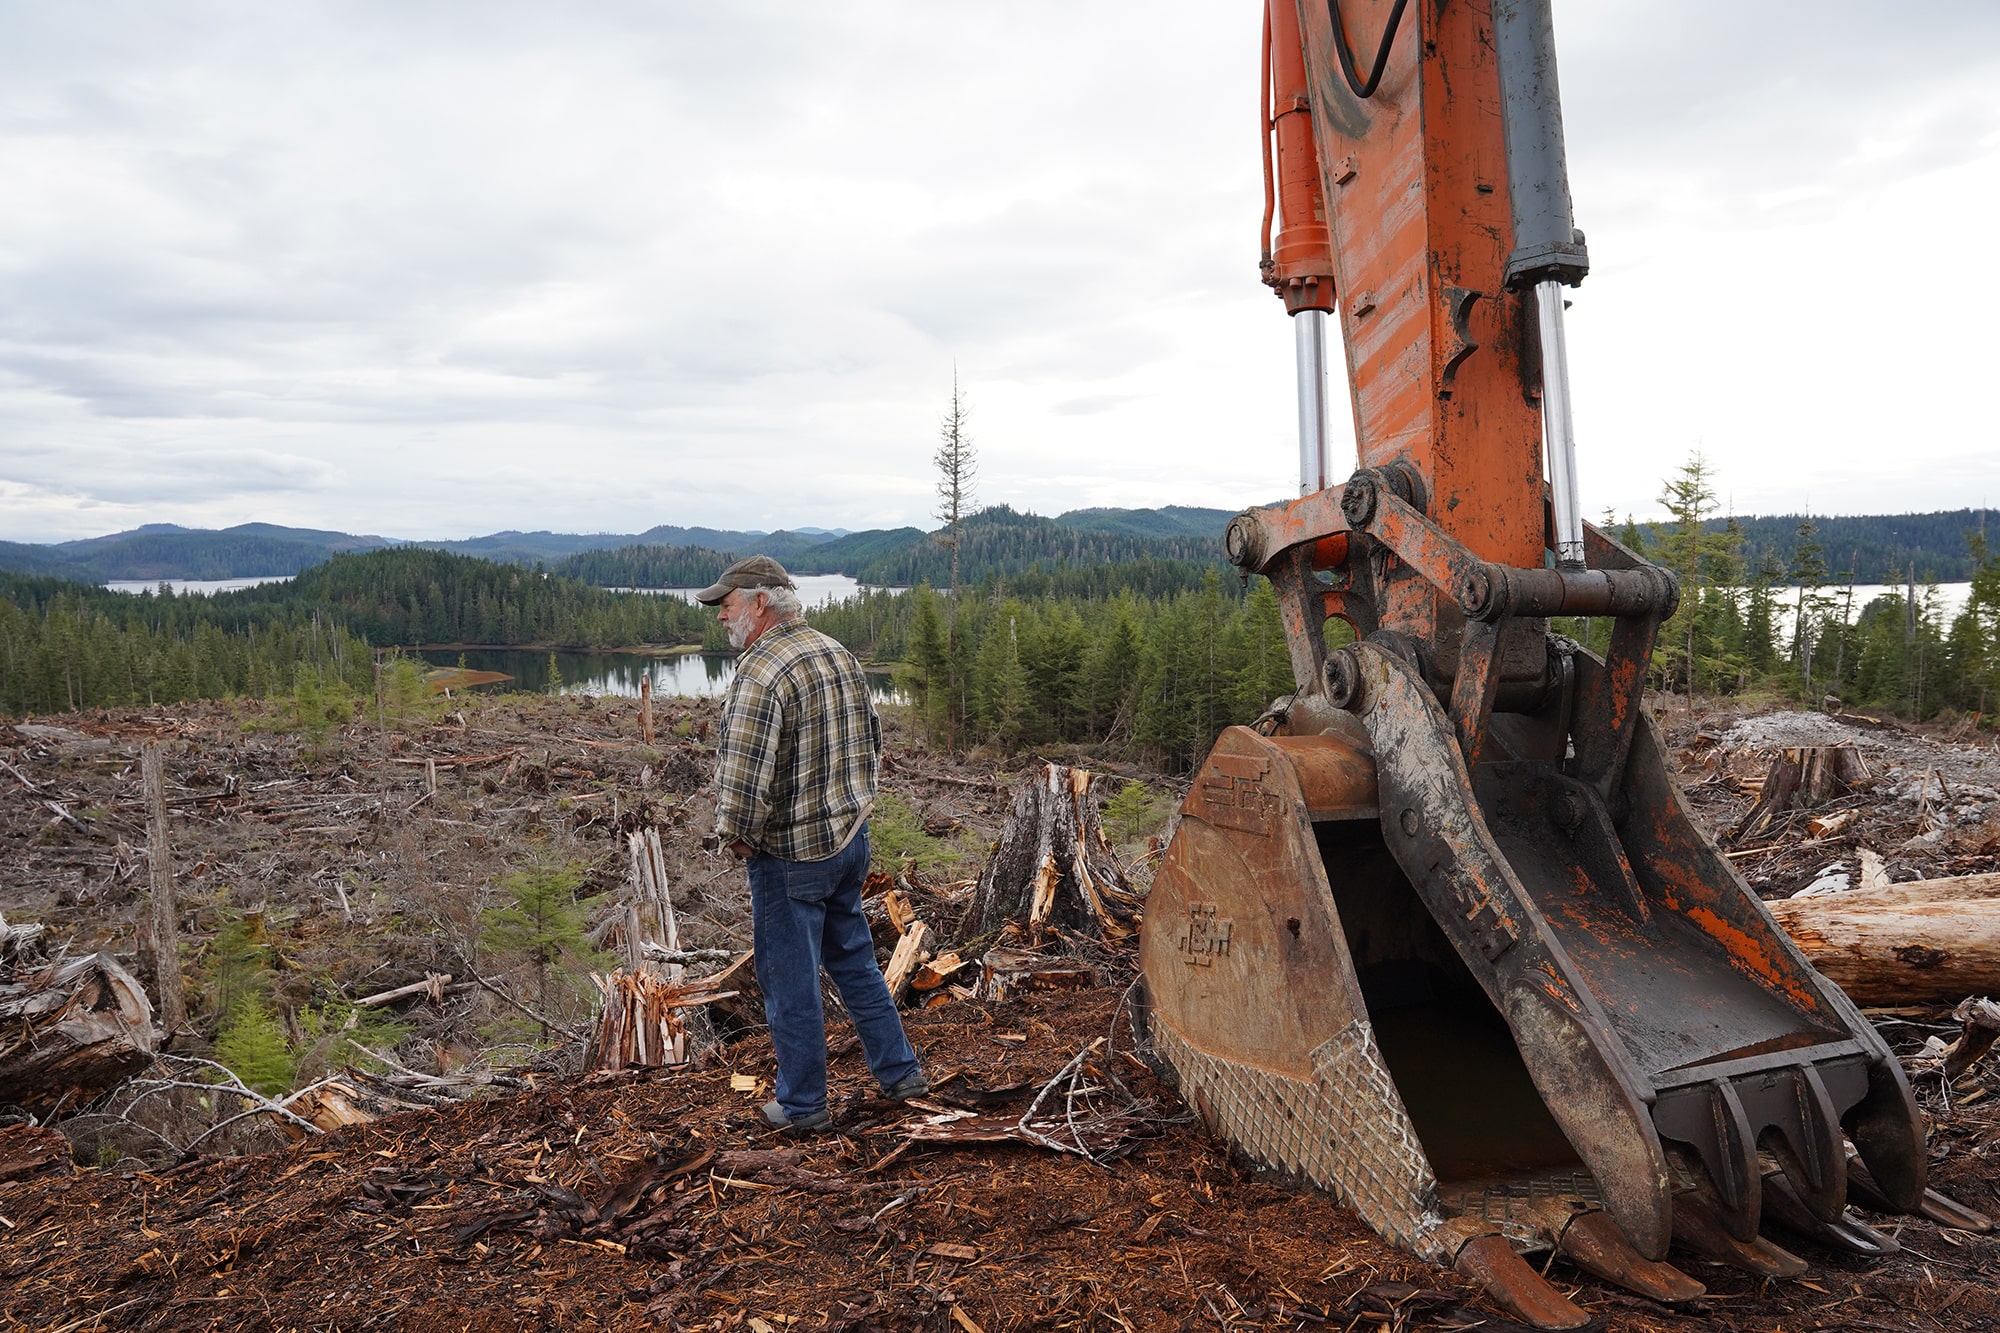 a man in a plaid shirt and baseball cap stands in a clear cut with a giant red excavator digger next to him